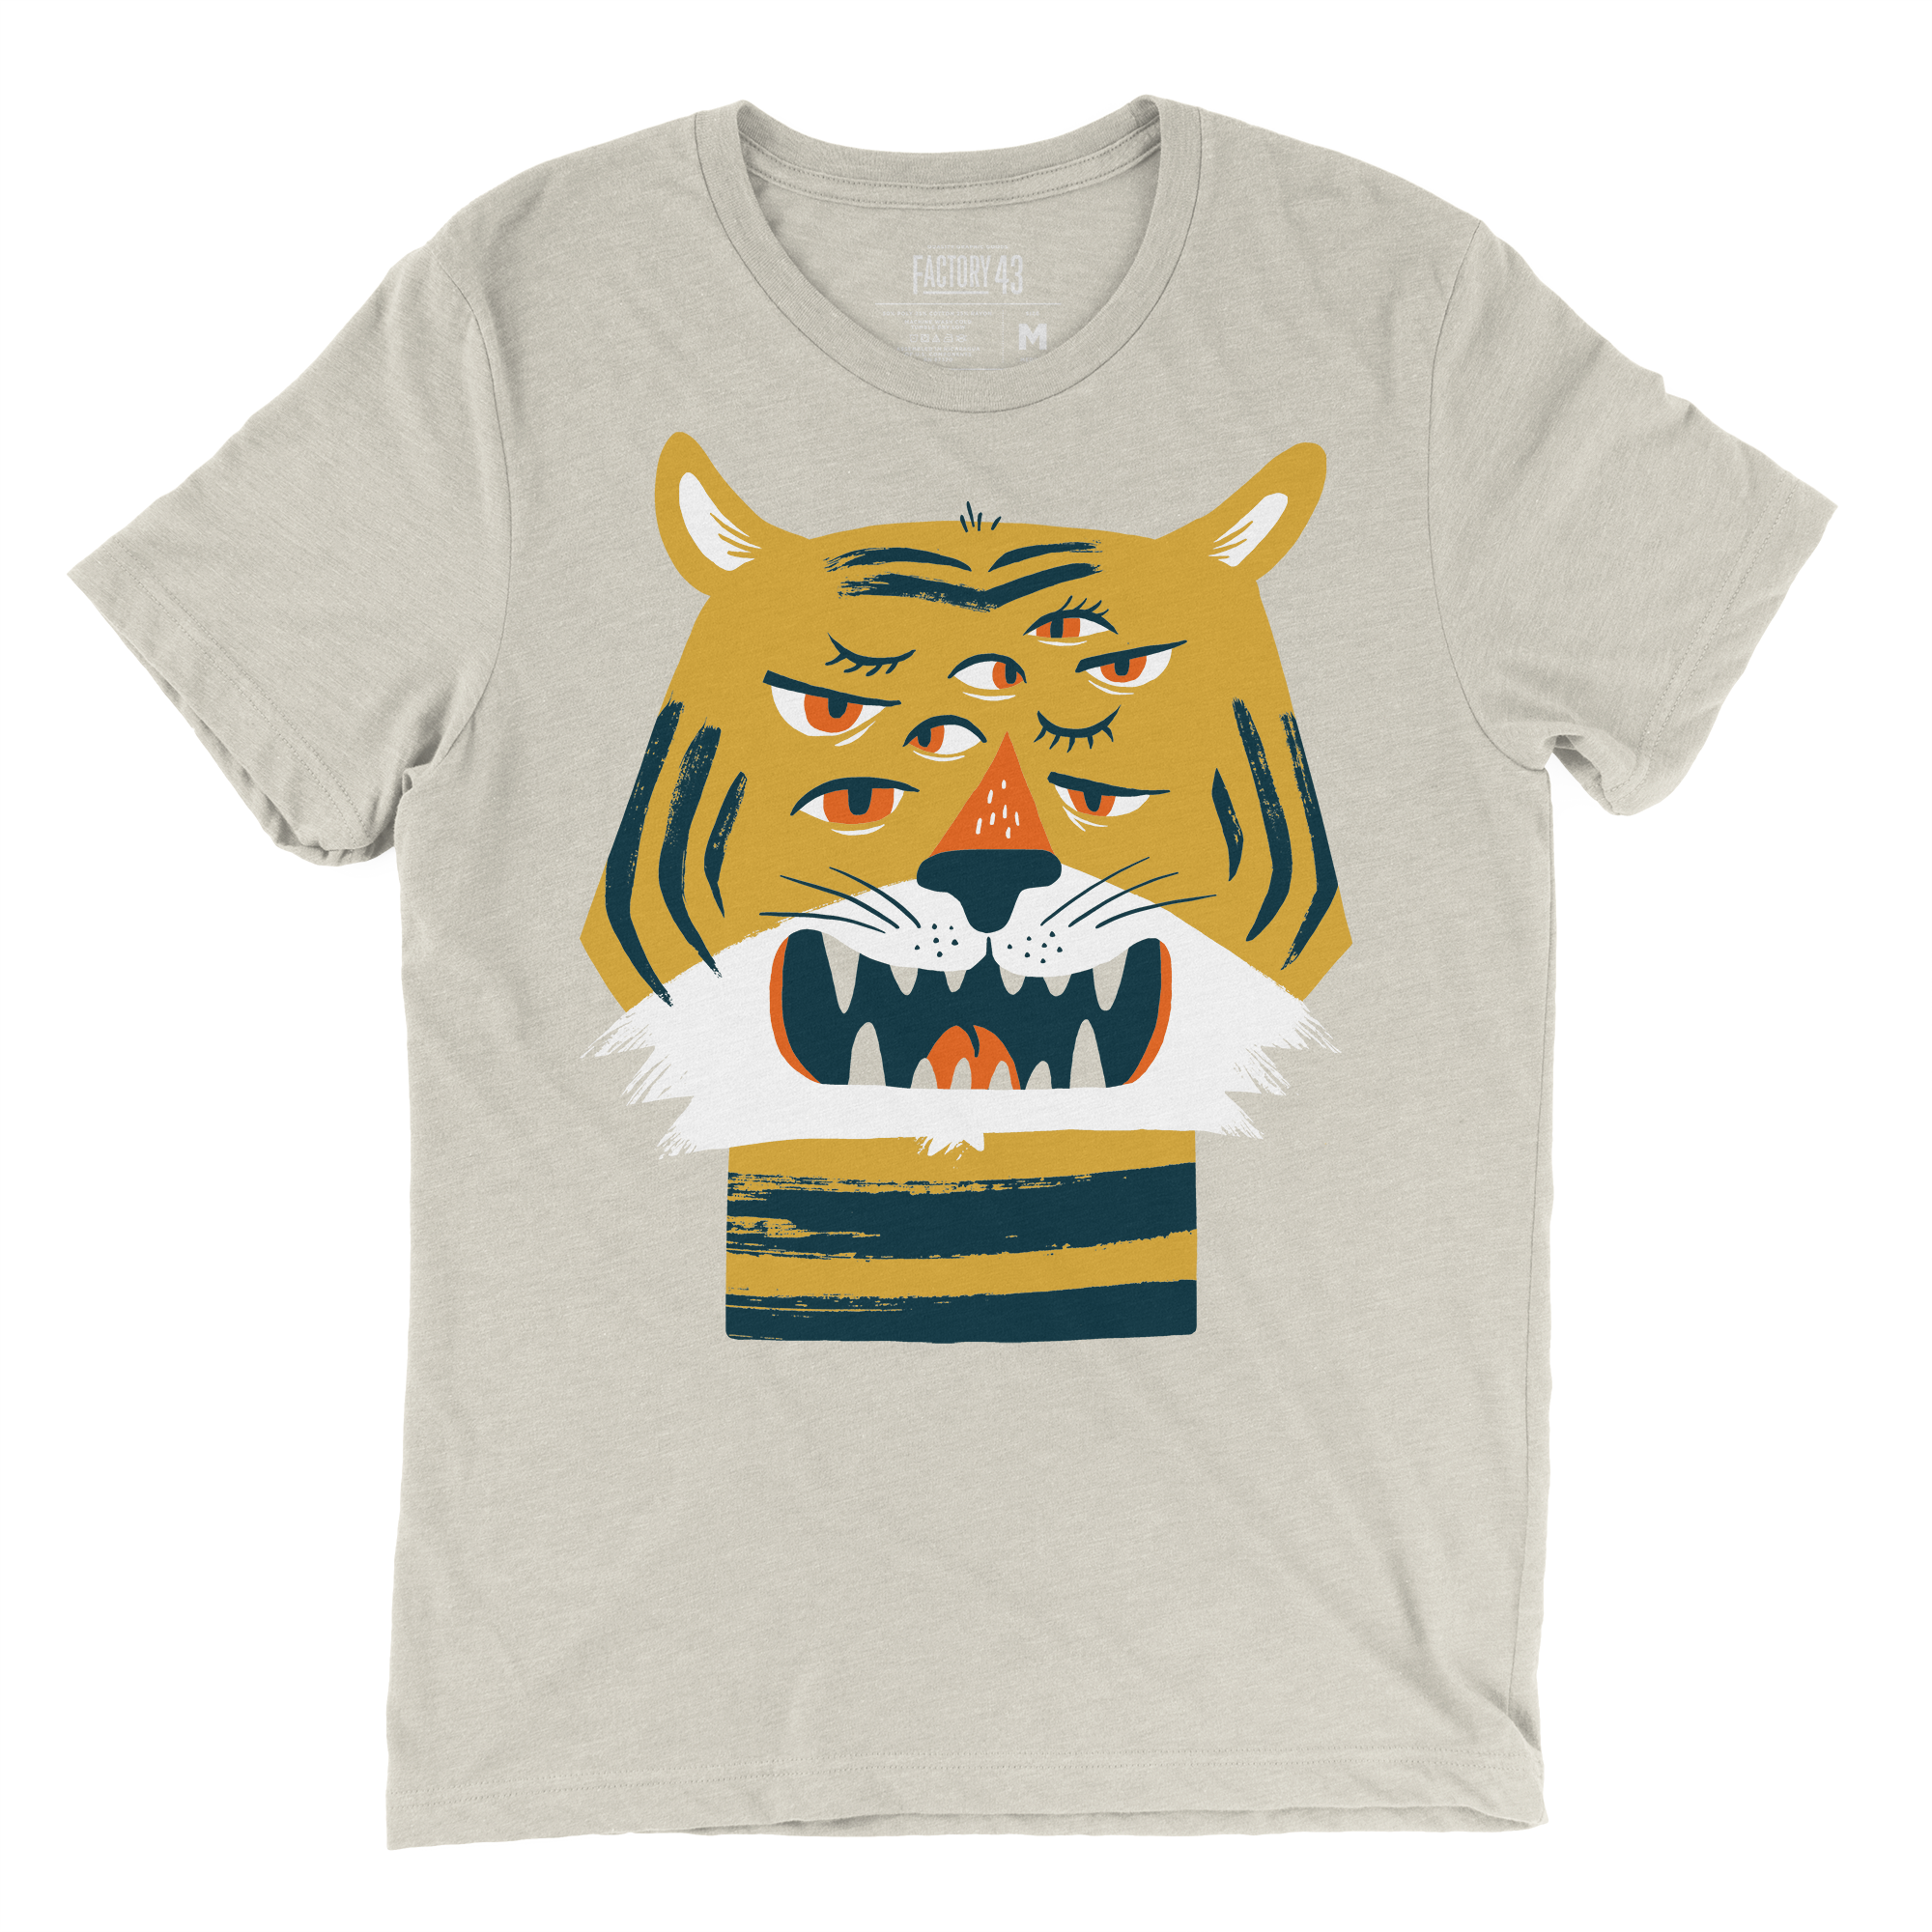 Eyes of the Tiger tee